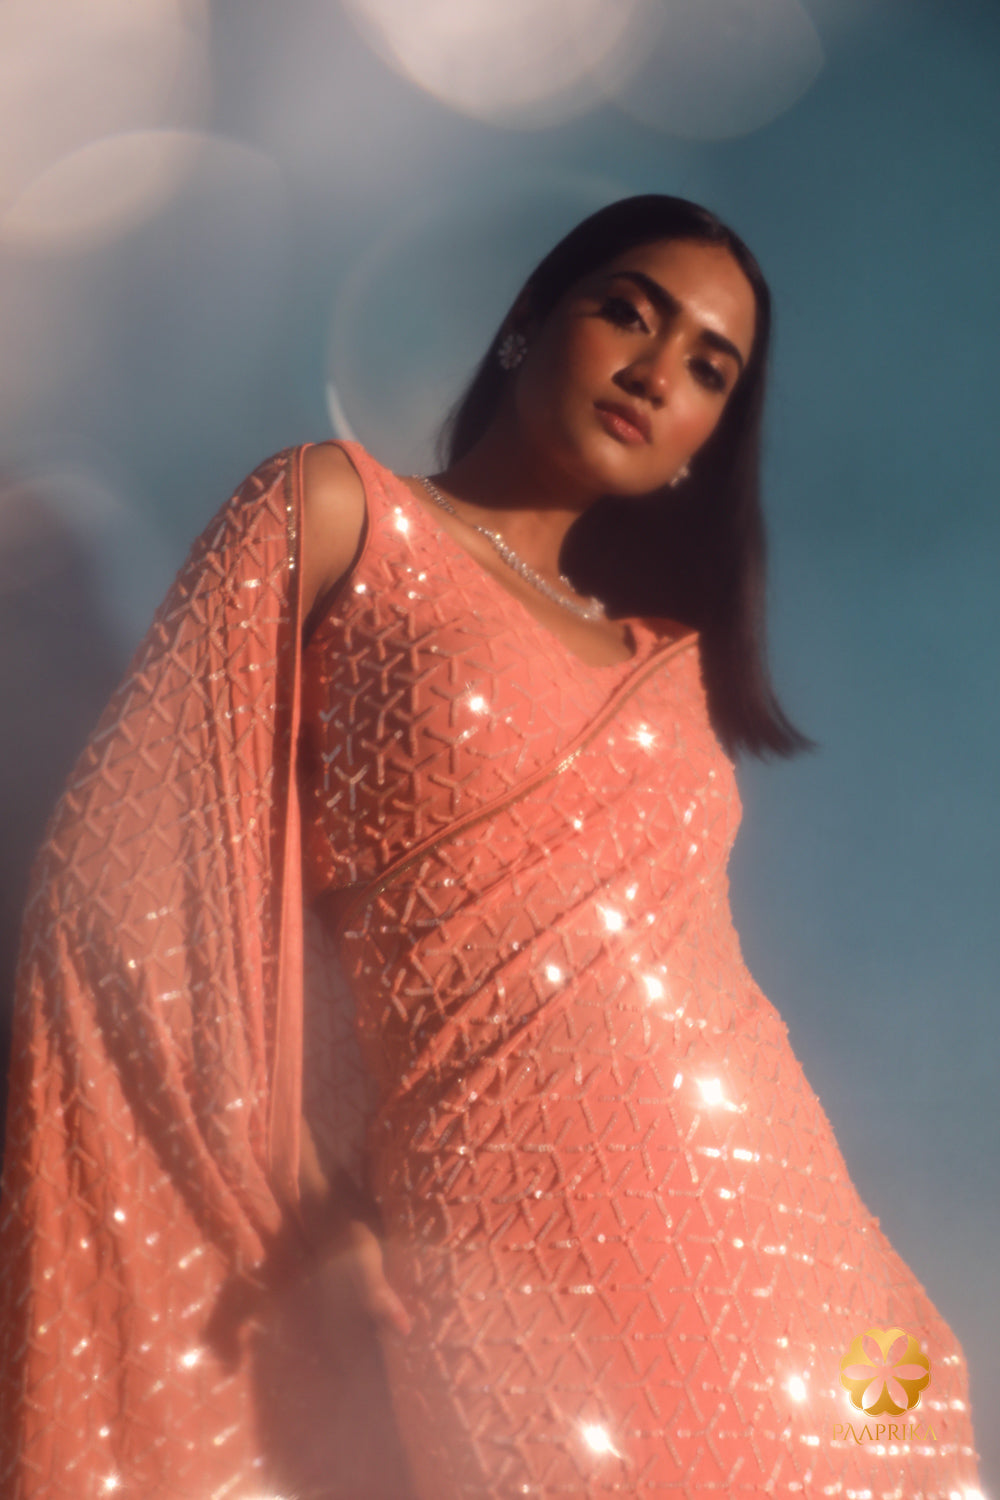 Hand-embroidered peach-colored sequins saree designed with an intricate geometric pattern. Stand out at cocktail events. Personalize the color to your preference. Learn more on our website.